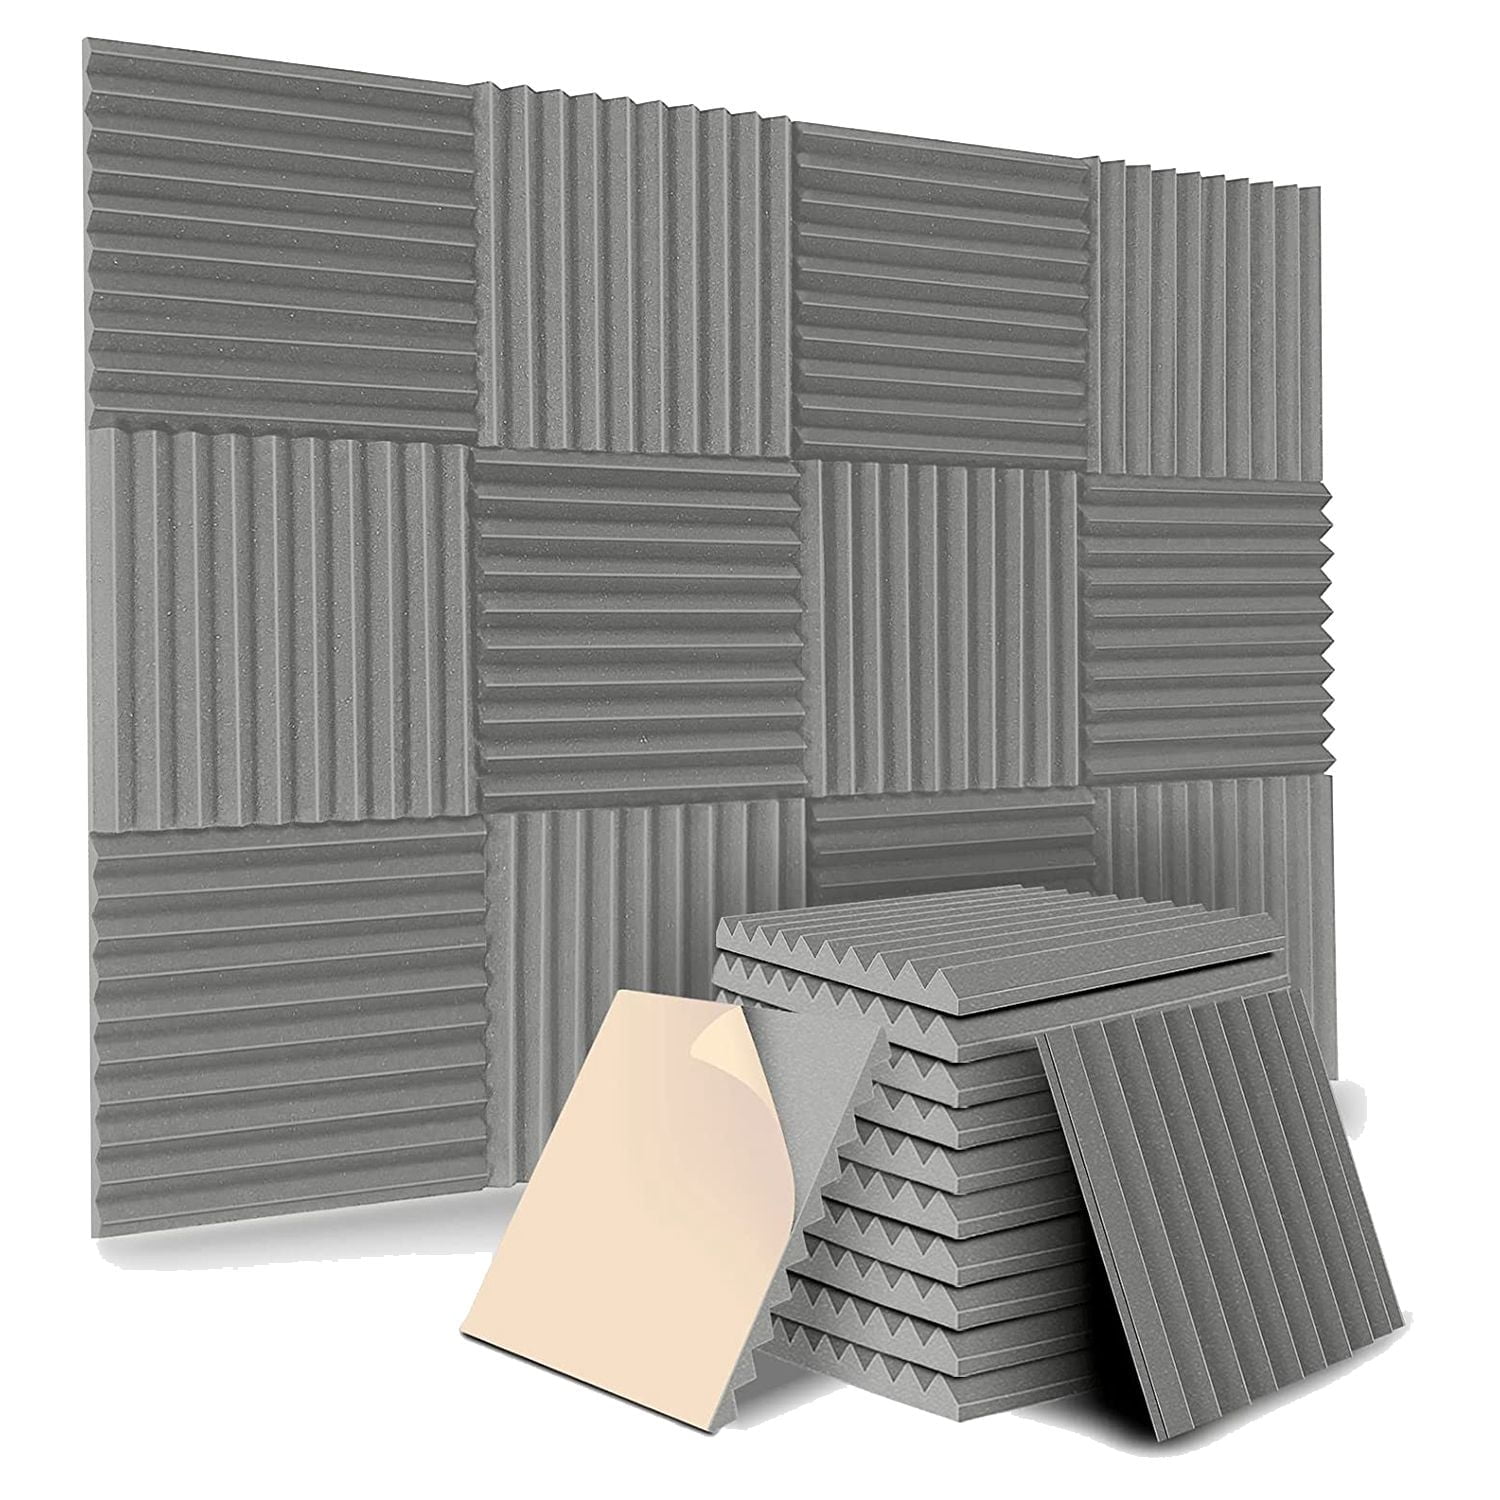 Musfunny 12 Pcs 2 x 12 x 12 Sound Proof Acoustic Foam Panels High  Density Wedges Soundproofing Wall Panels Sound Dampening Panel for Studio,  Home, Offices - Gray 